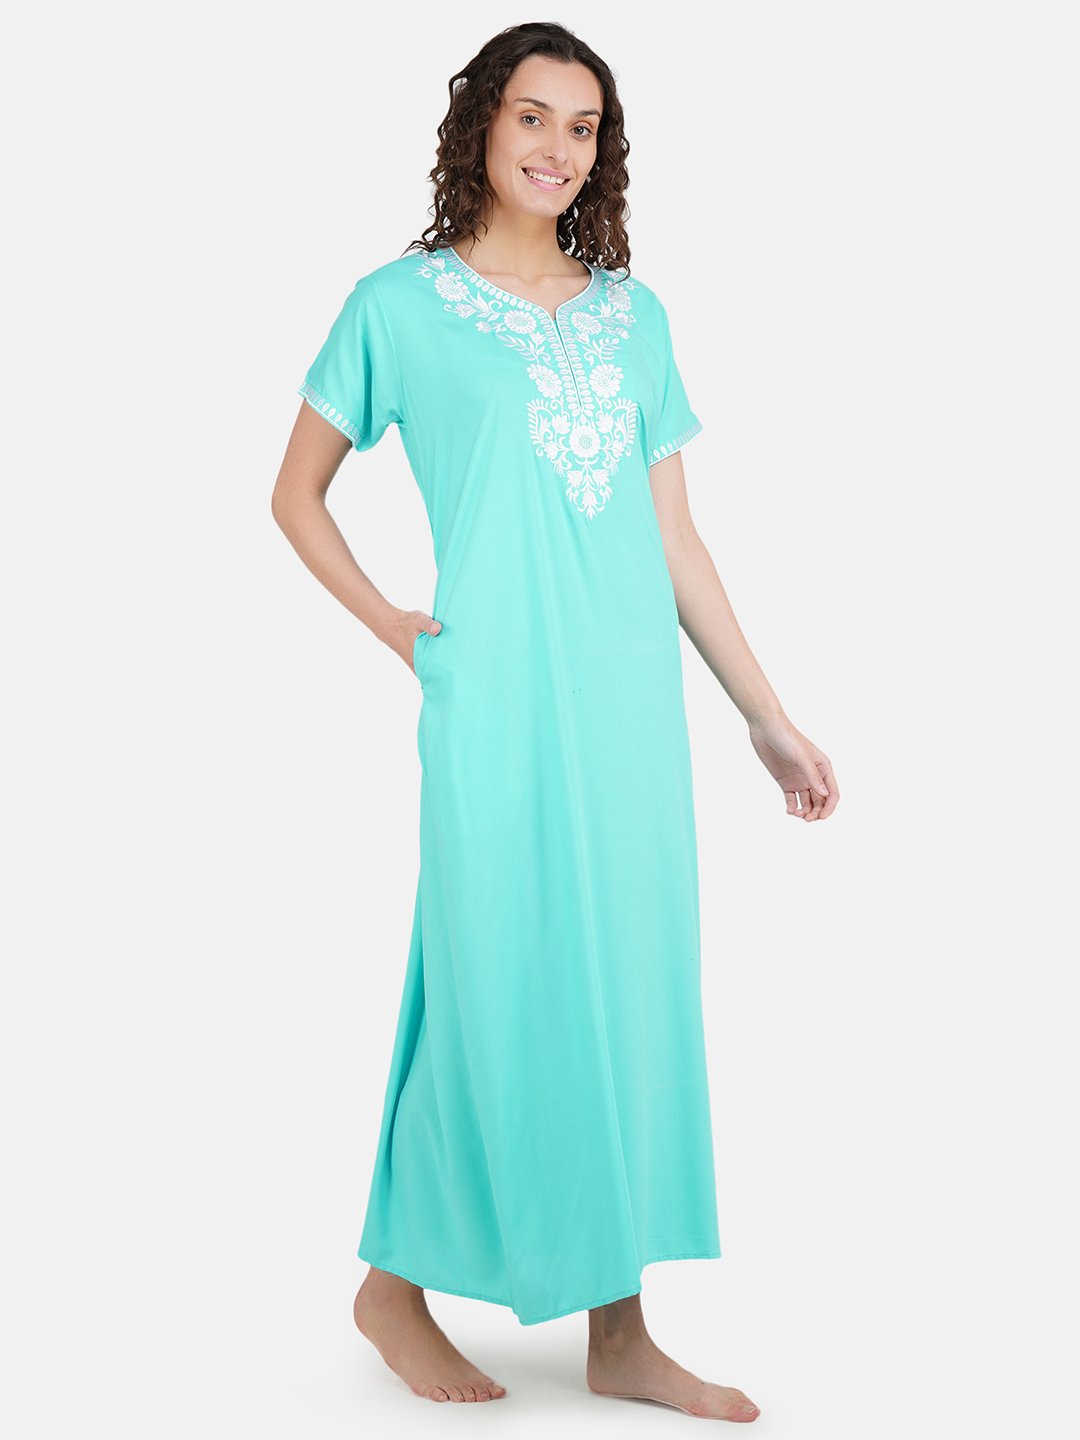 White Six Floral Embroidered Nightgown